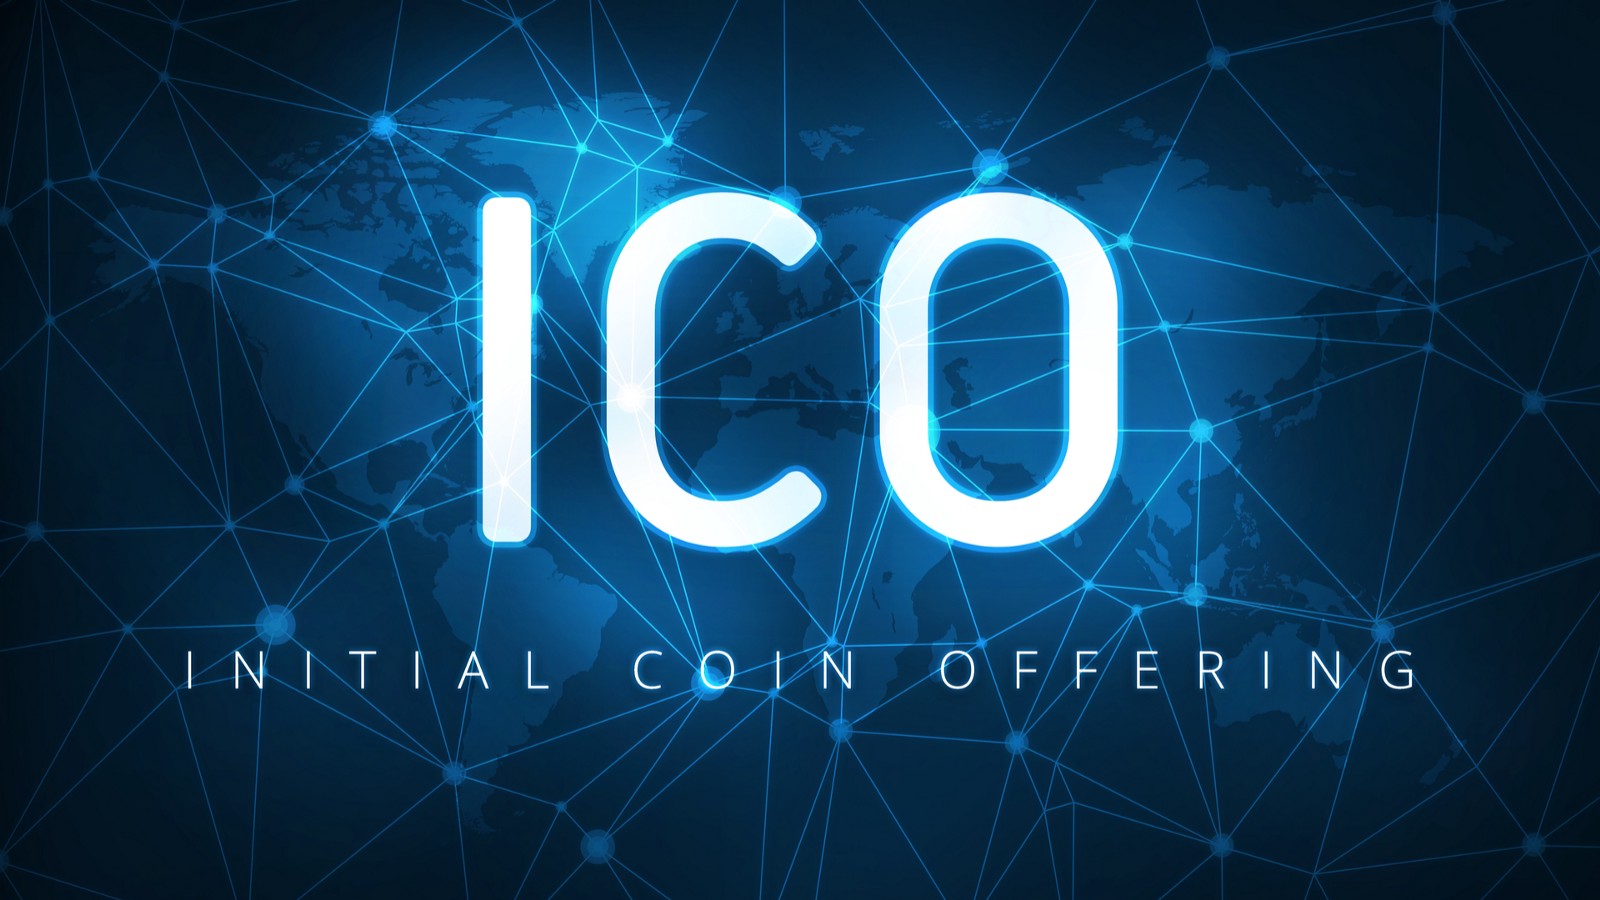 Complete Guideline to launch a Successful Initial Coin Offering